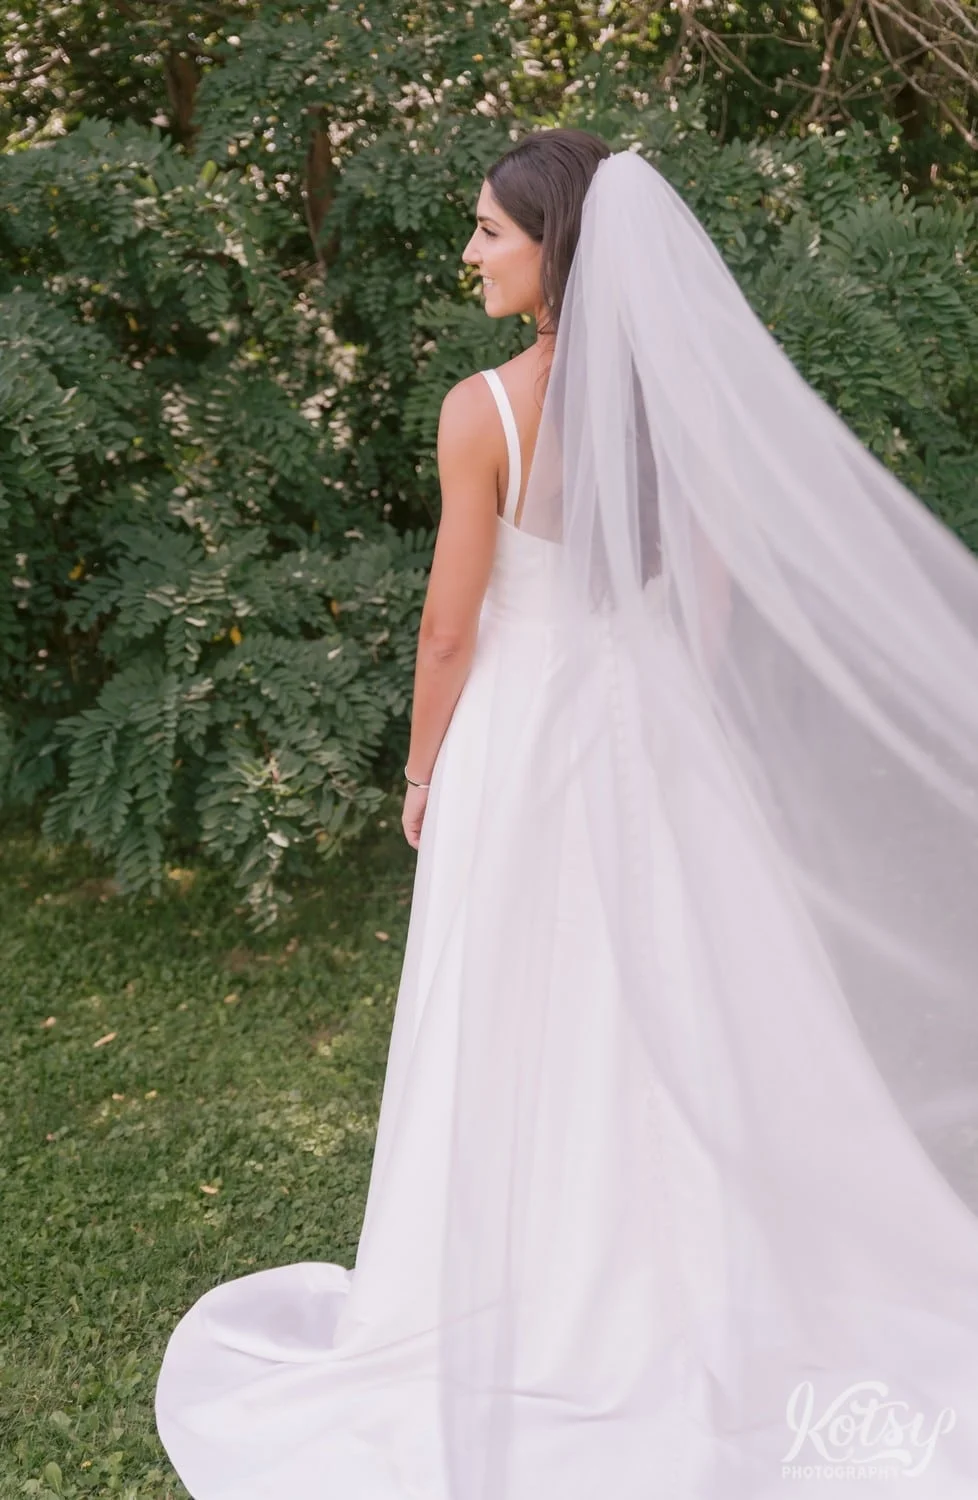 A bride's veil stretches from a groom's head to the camera as she stands at a park in Toronto, Canada